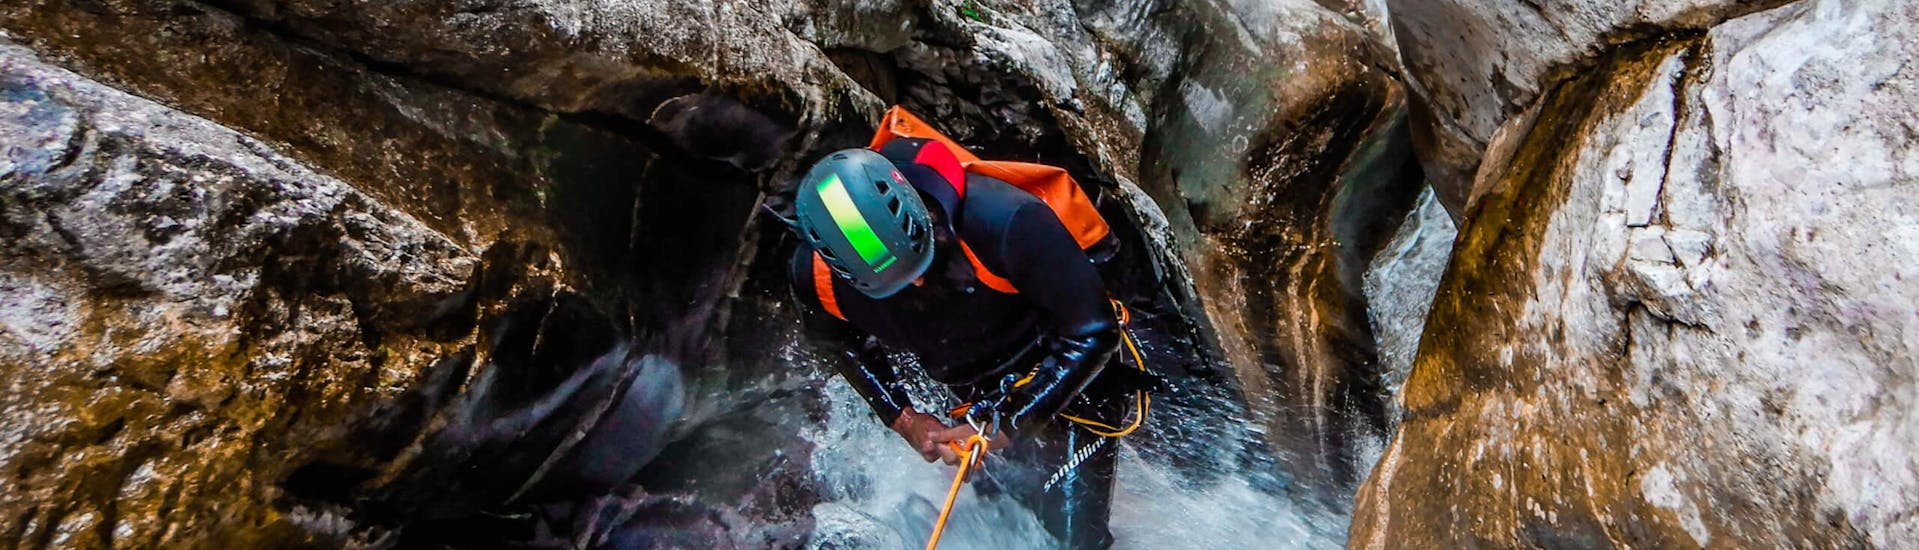 Descend next to the waterfall during Canyoning "Classic" - Savinja organized by Funpark Menina